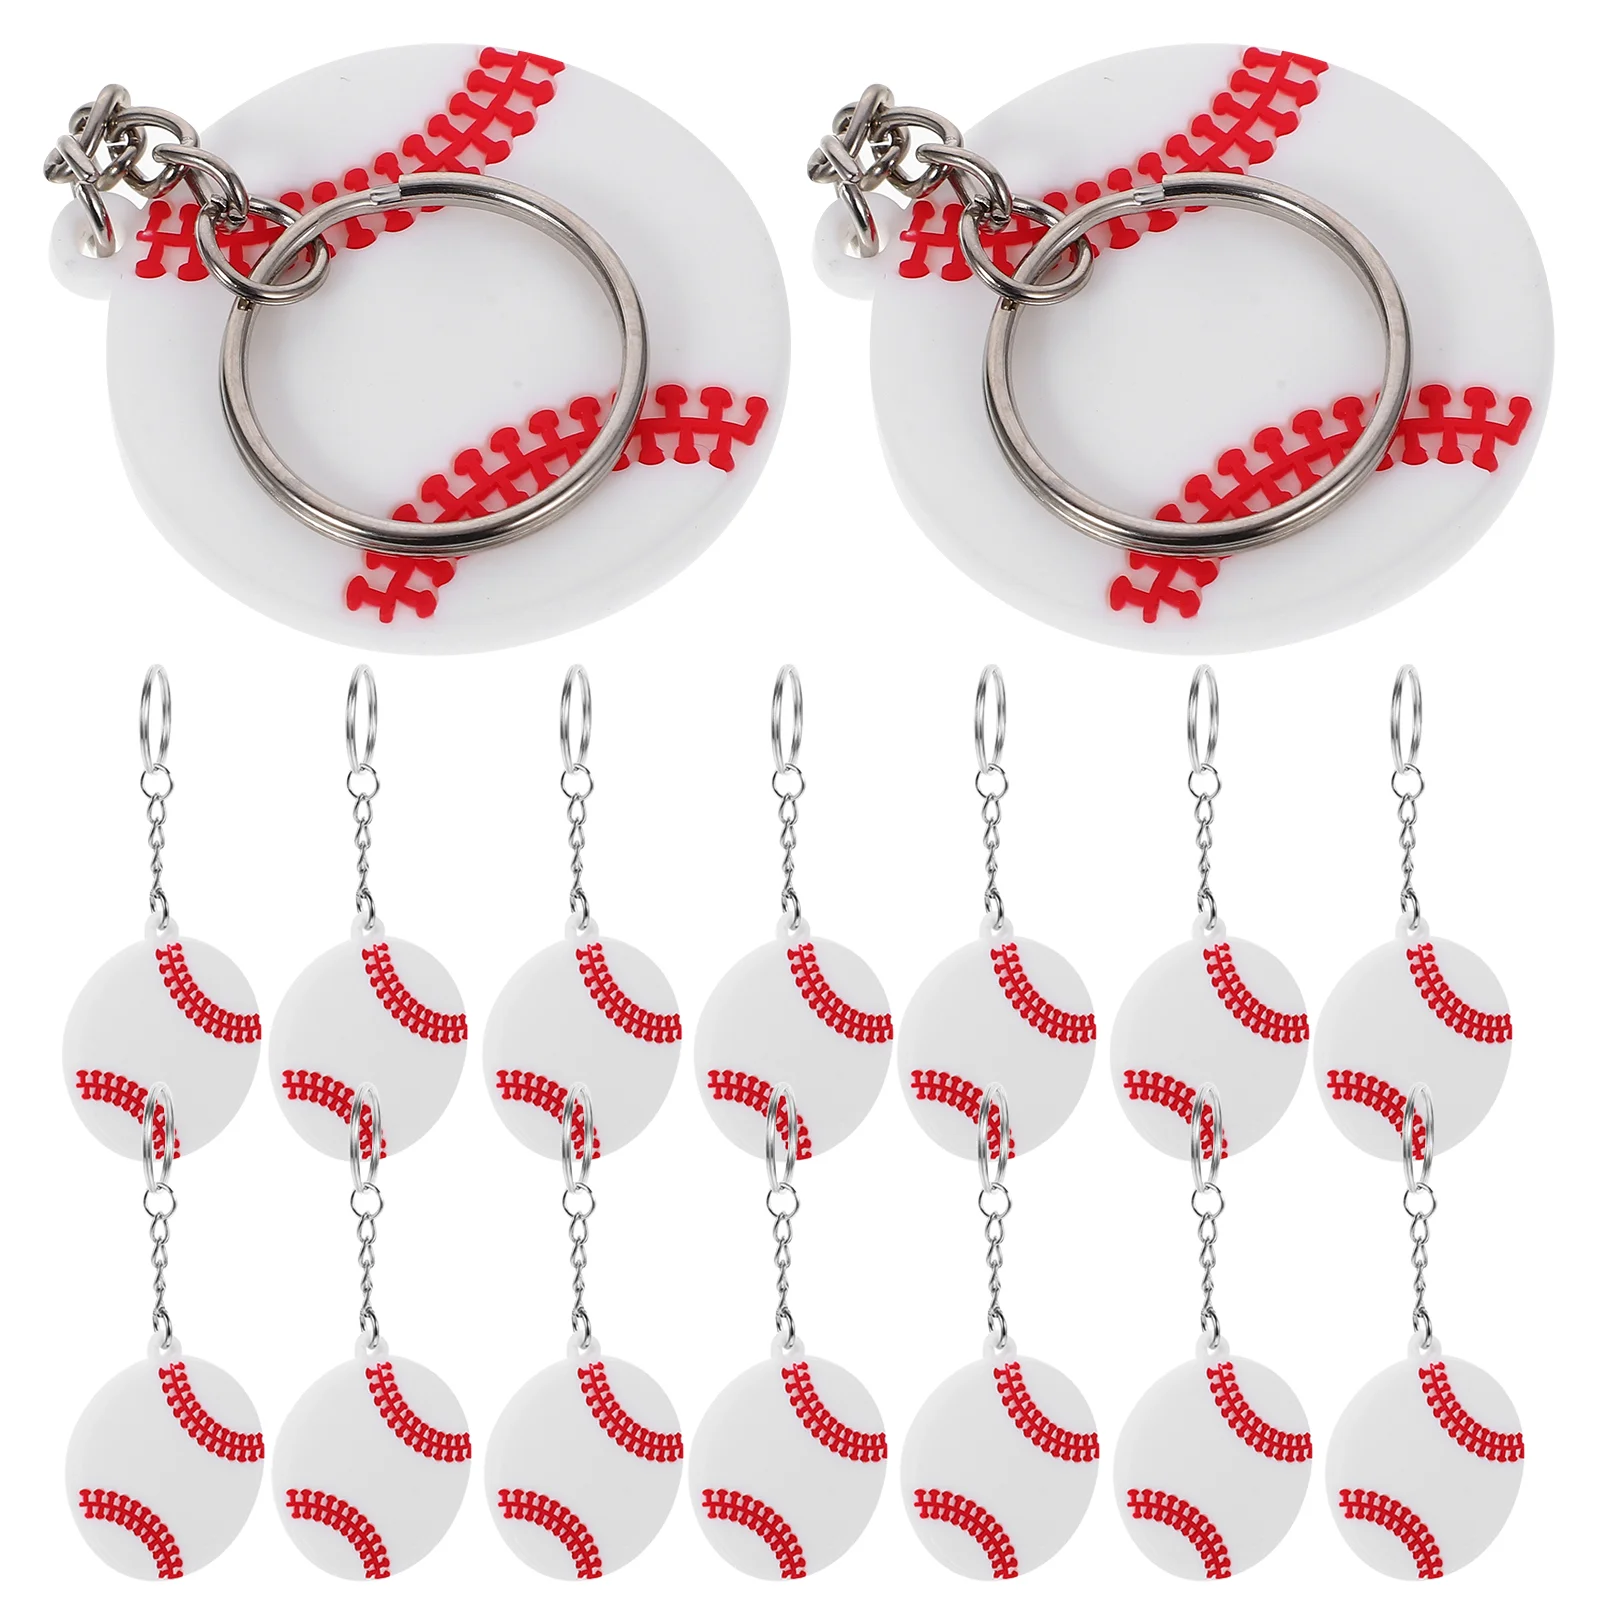 20 Pcs Volleyball Key Ring Volleyball Keychain Volleyball Charms Sports Keychain Sports Party Favors